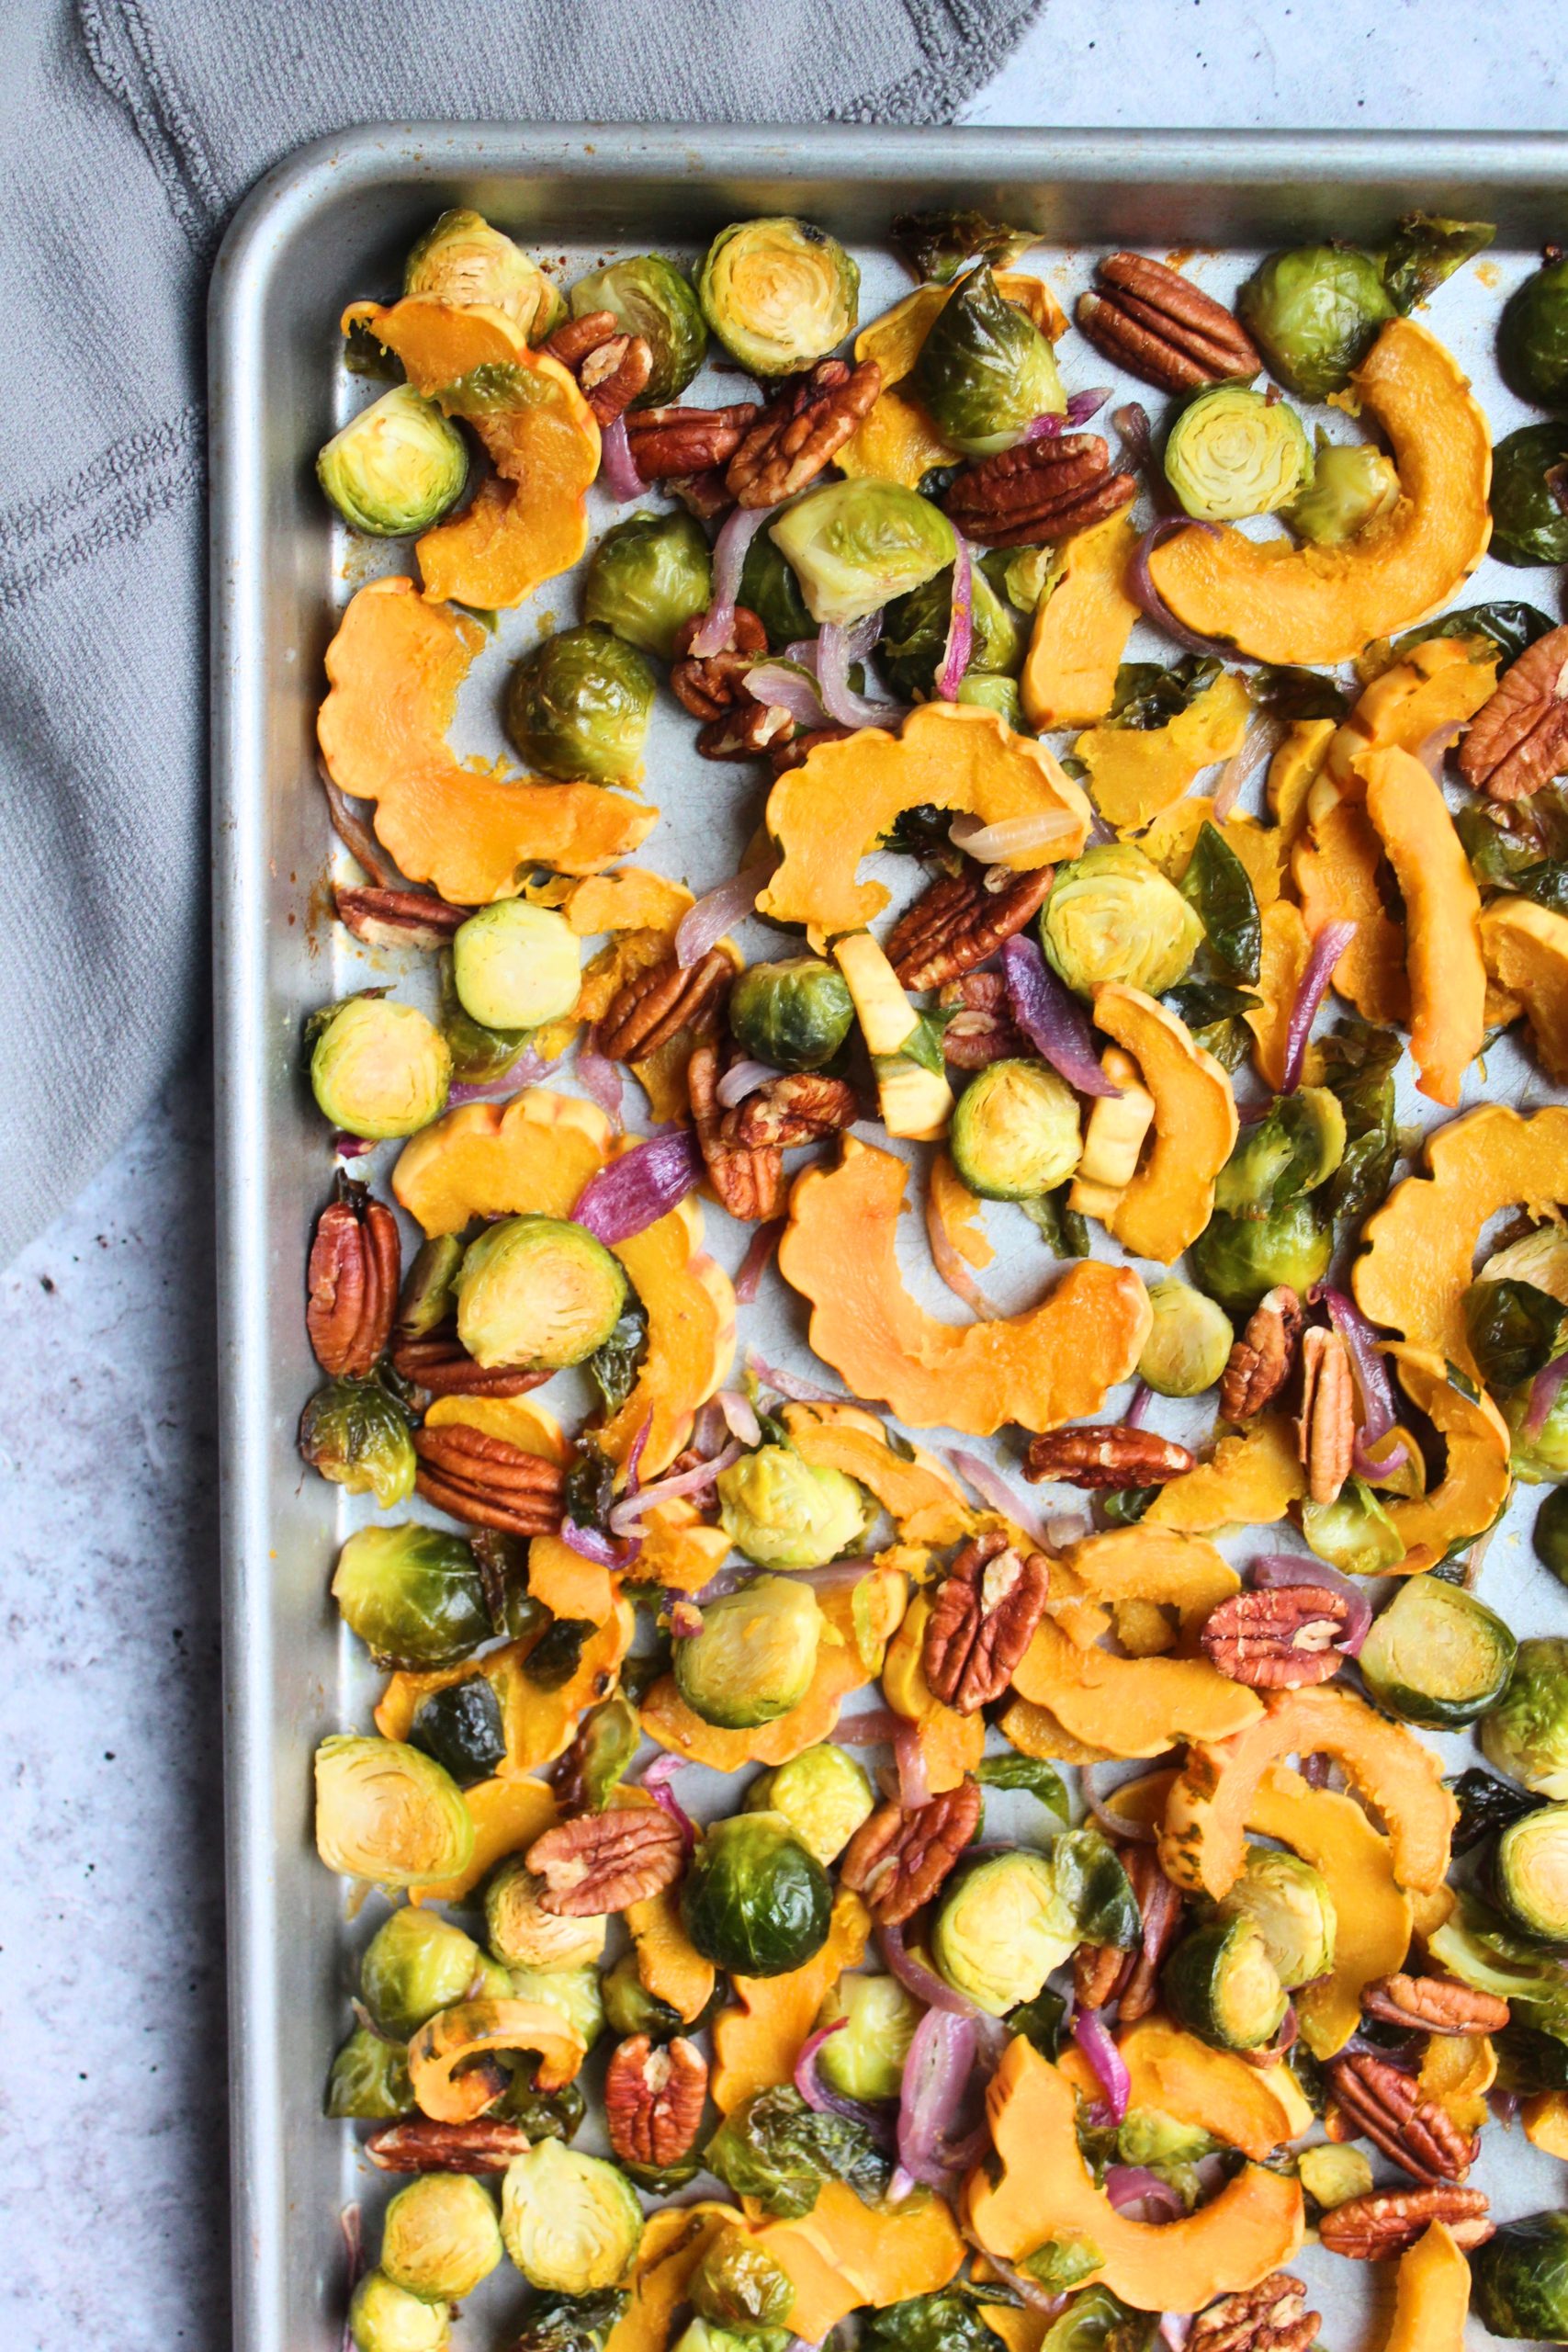 Roasted Brussel Sprouts with Delicata Squash and Pecans